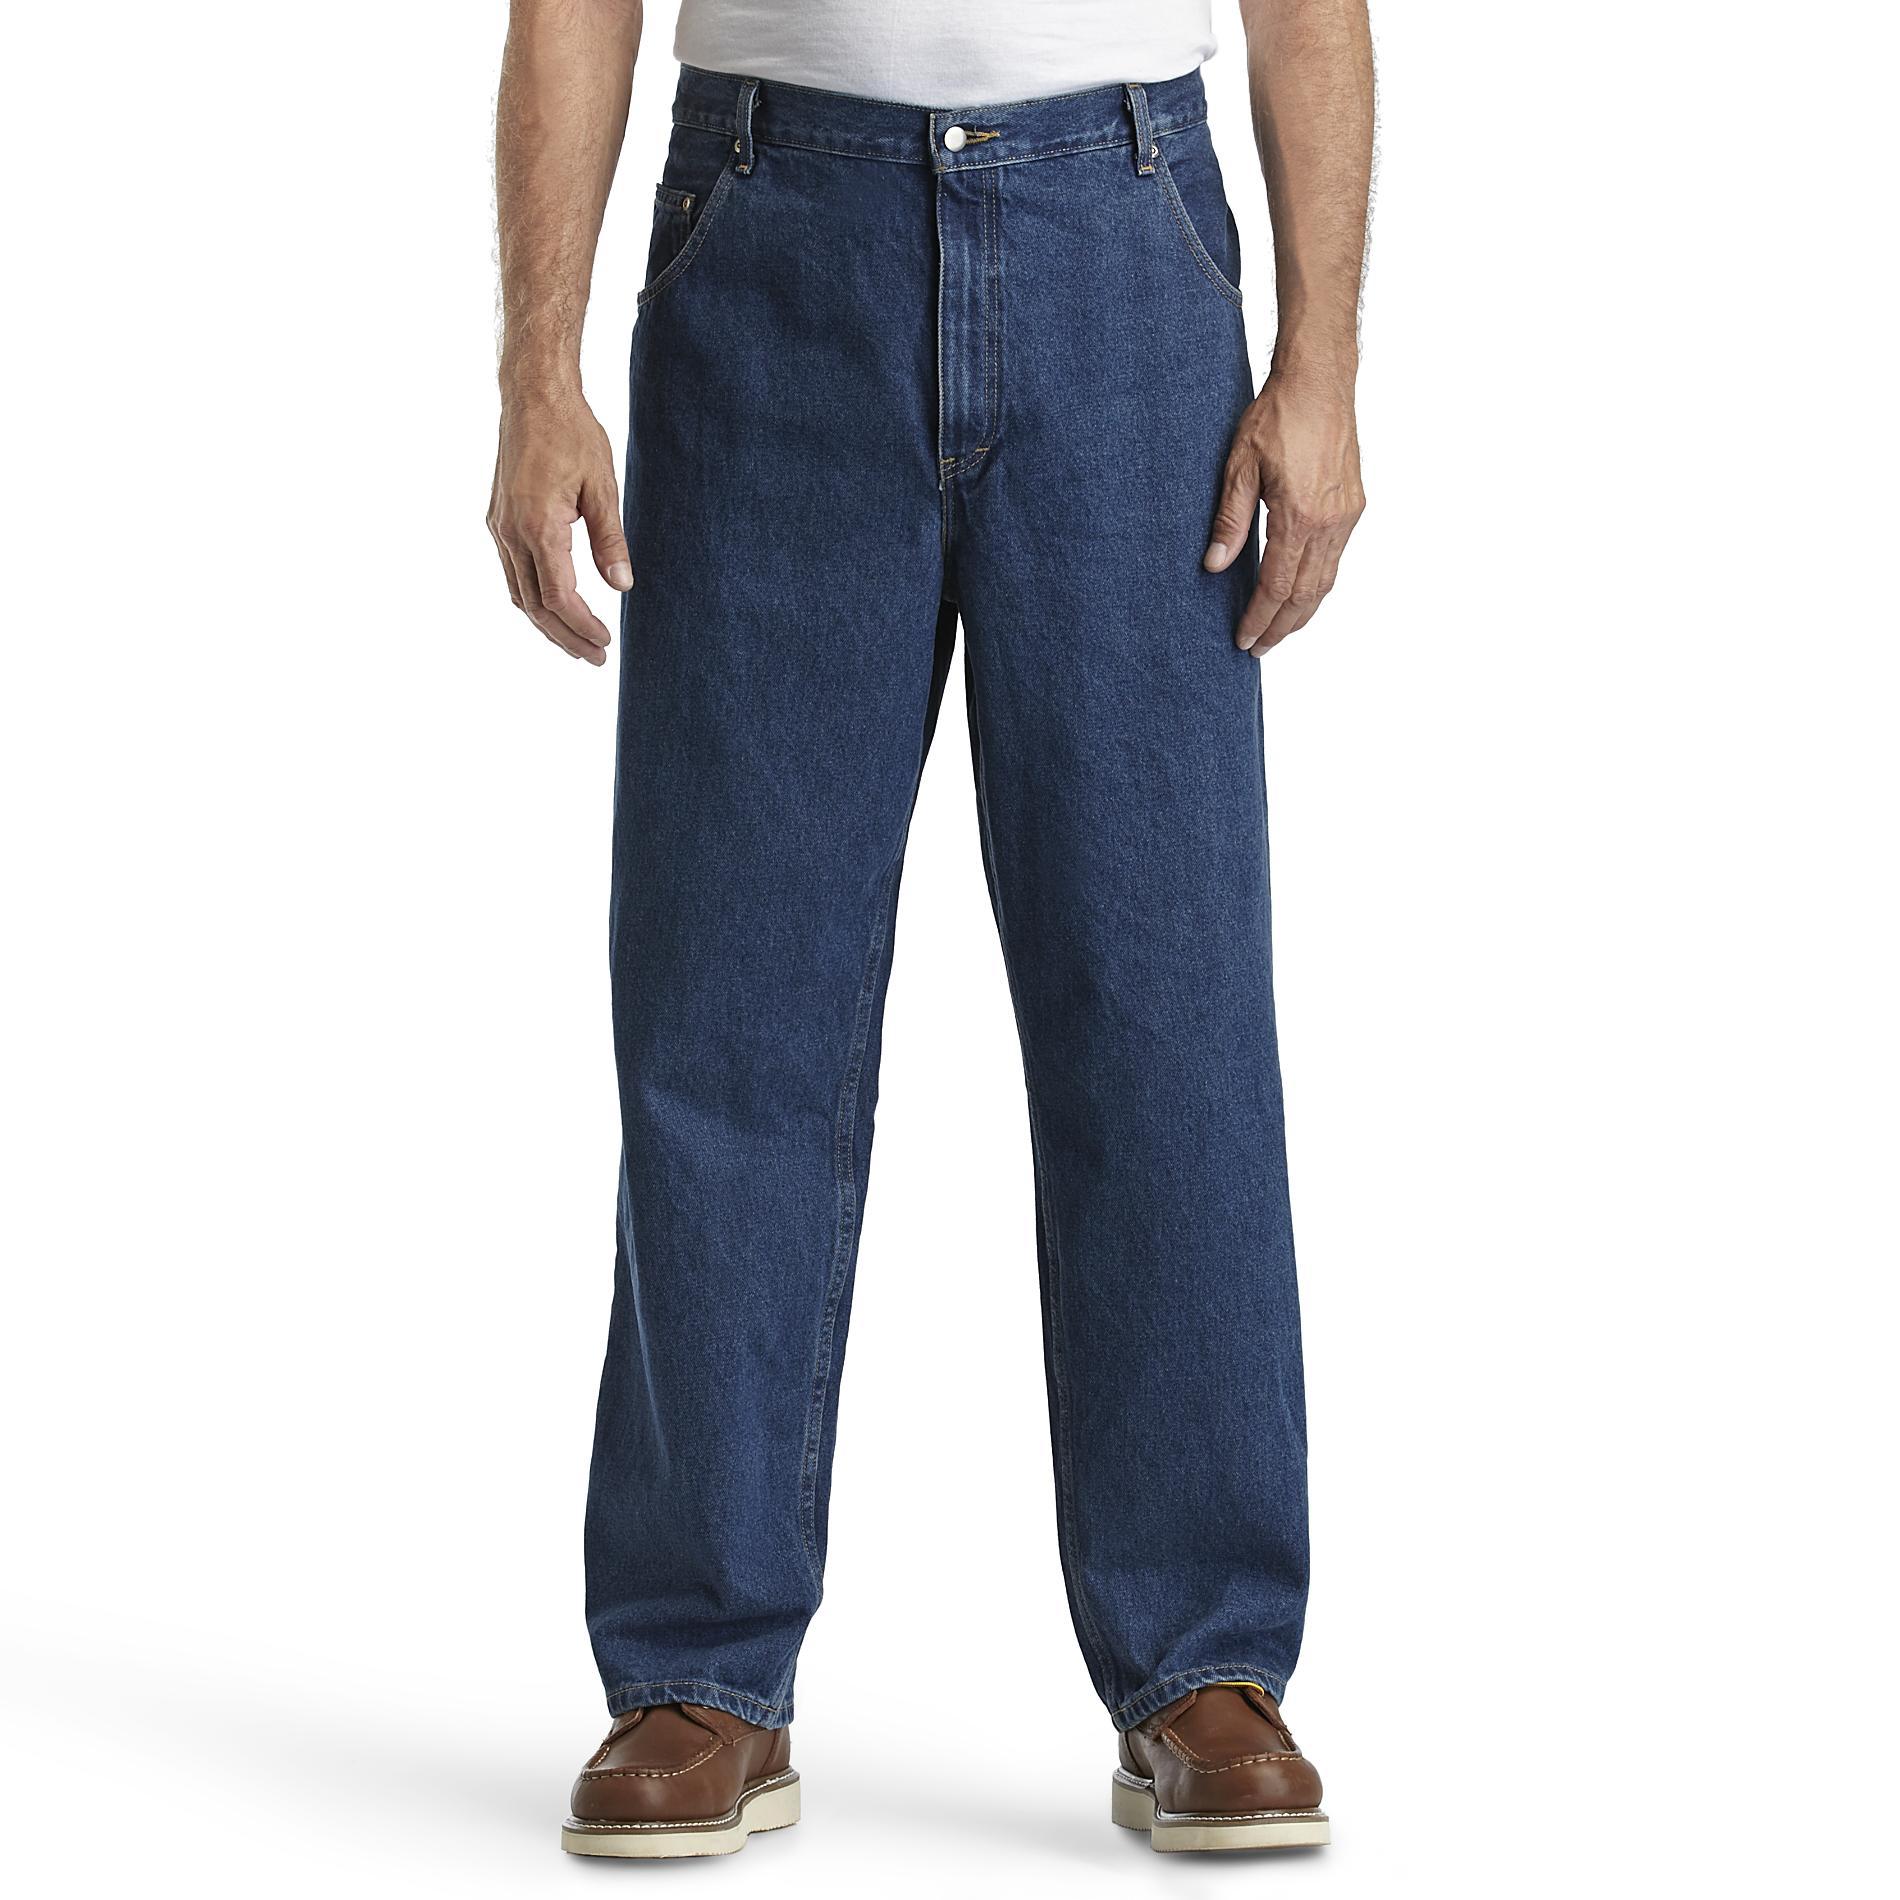 Basic Editions Men's Big & Tall Jeans